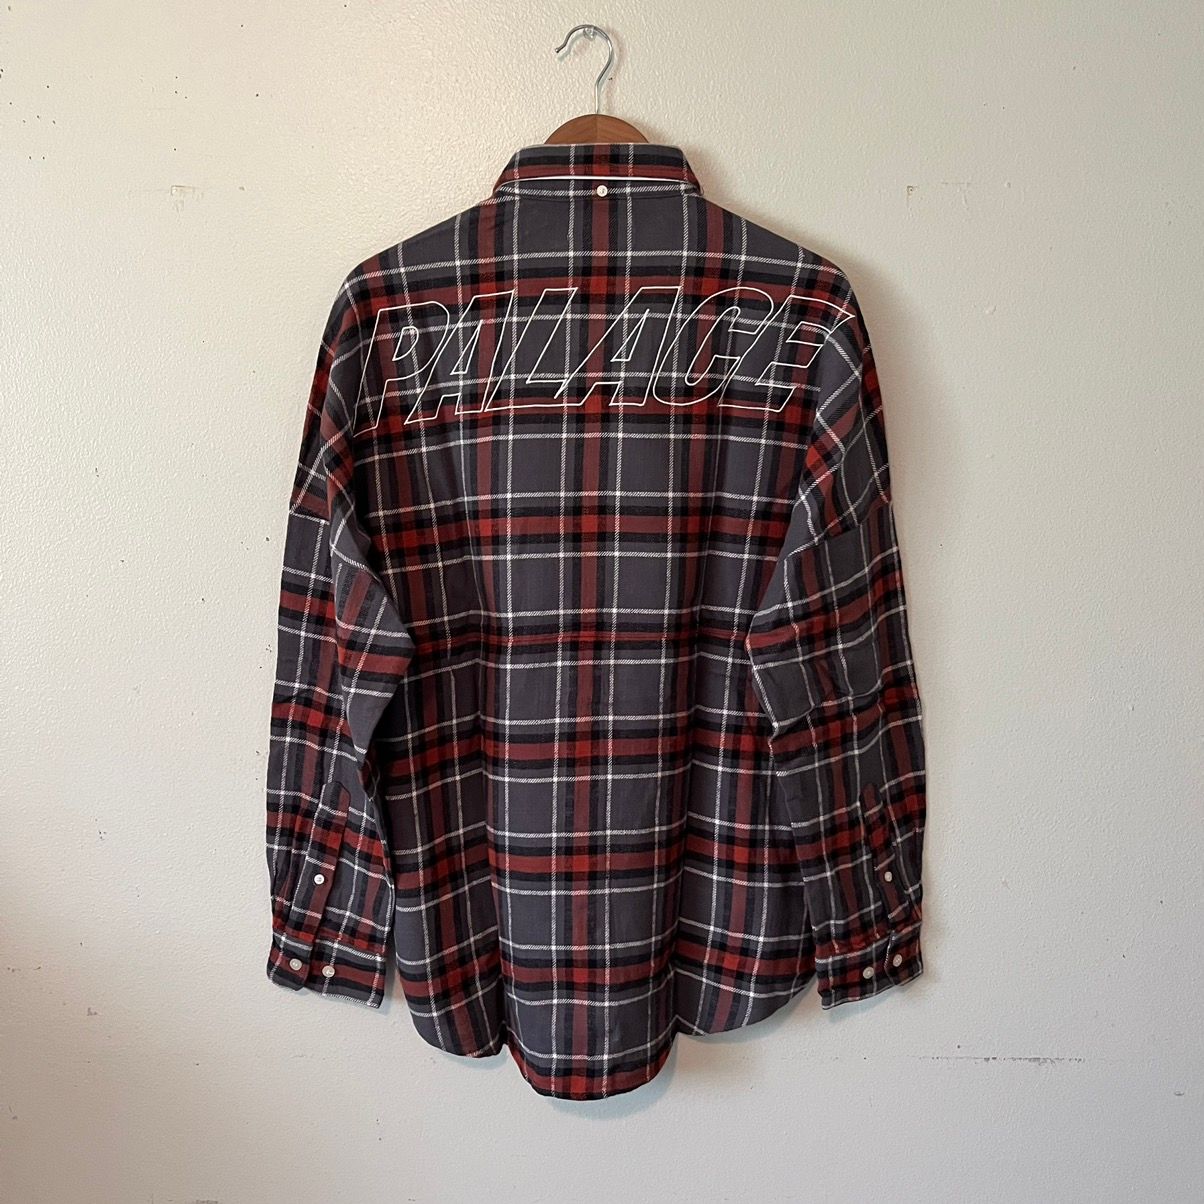 Palace Ss23 Lumber Yak Flannel in Null, Men's (Size Medium) Product Image